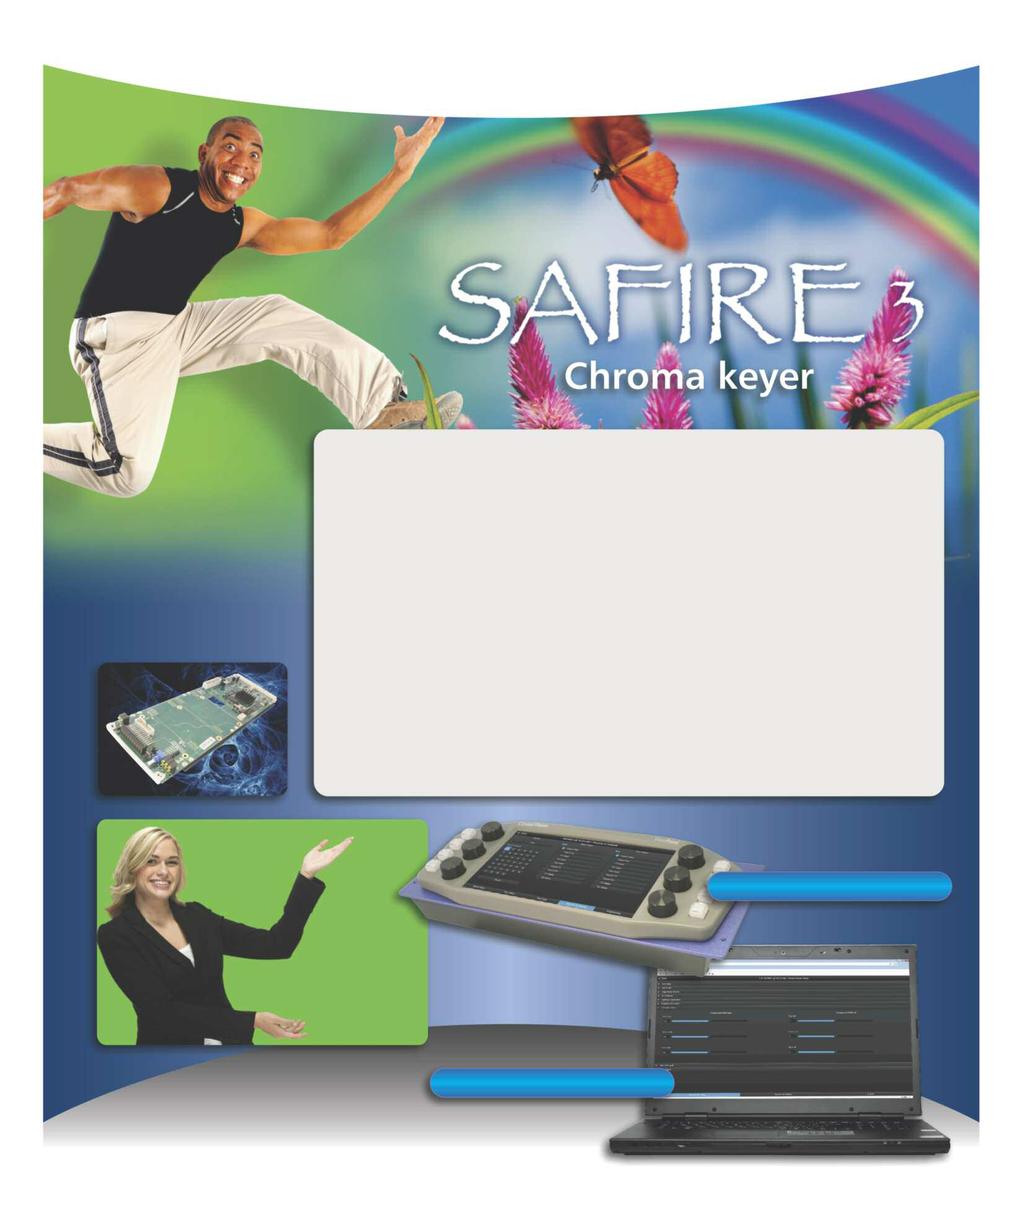 Everything modular: Keying Chroma keyers For full virtual studios or sports graphics Safire 3 12 Watts 3 Broadcast engineers choose the Safire 3 real-time chroma keyer for its picture quality,